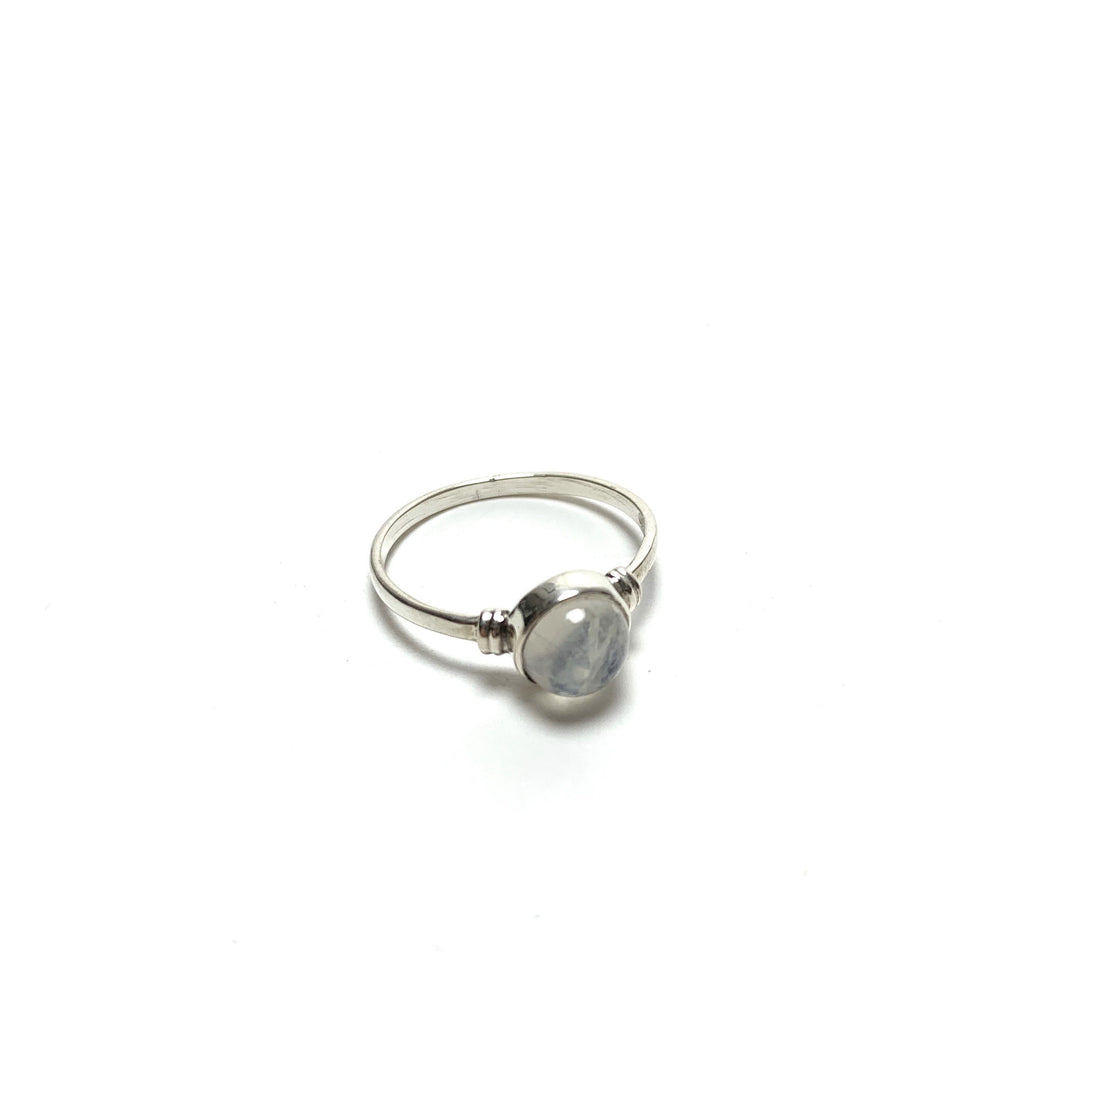 Moonstone Silver Ring Rings Crystals B. $18.00 Size 7 